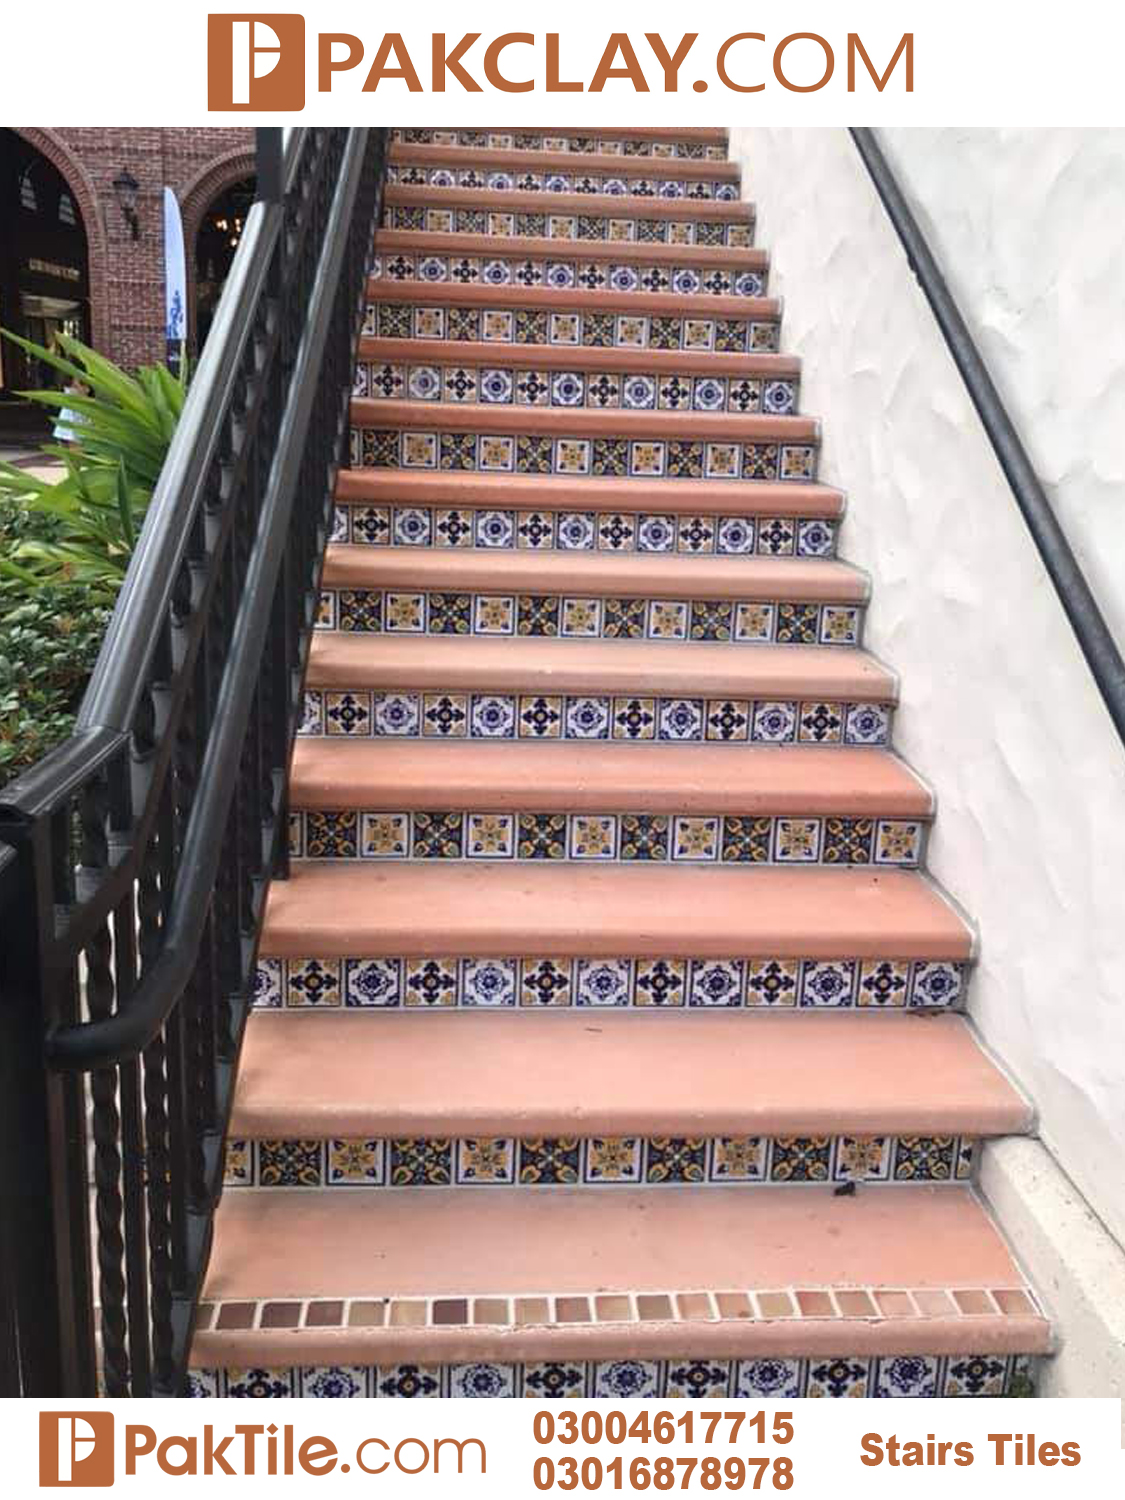 3 Pak Clay Best Staircase Tiles Texture in Pakistan